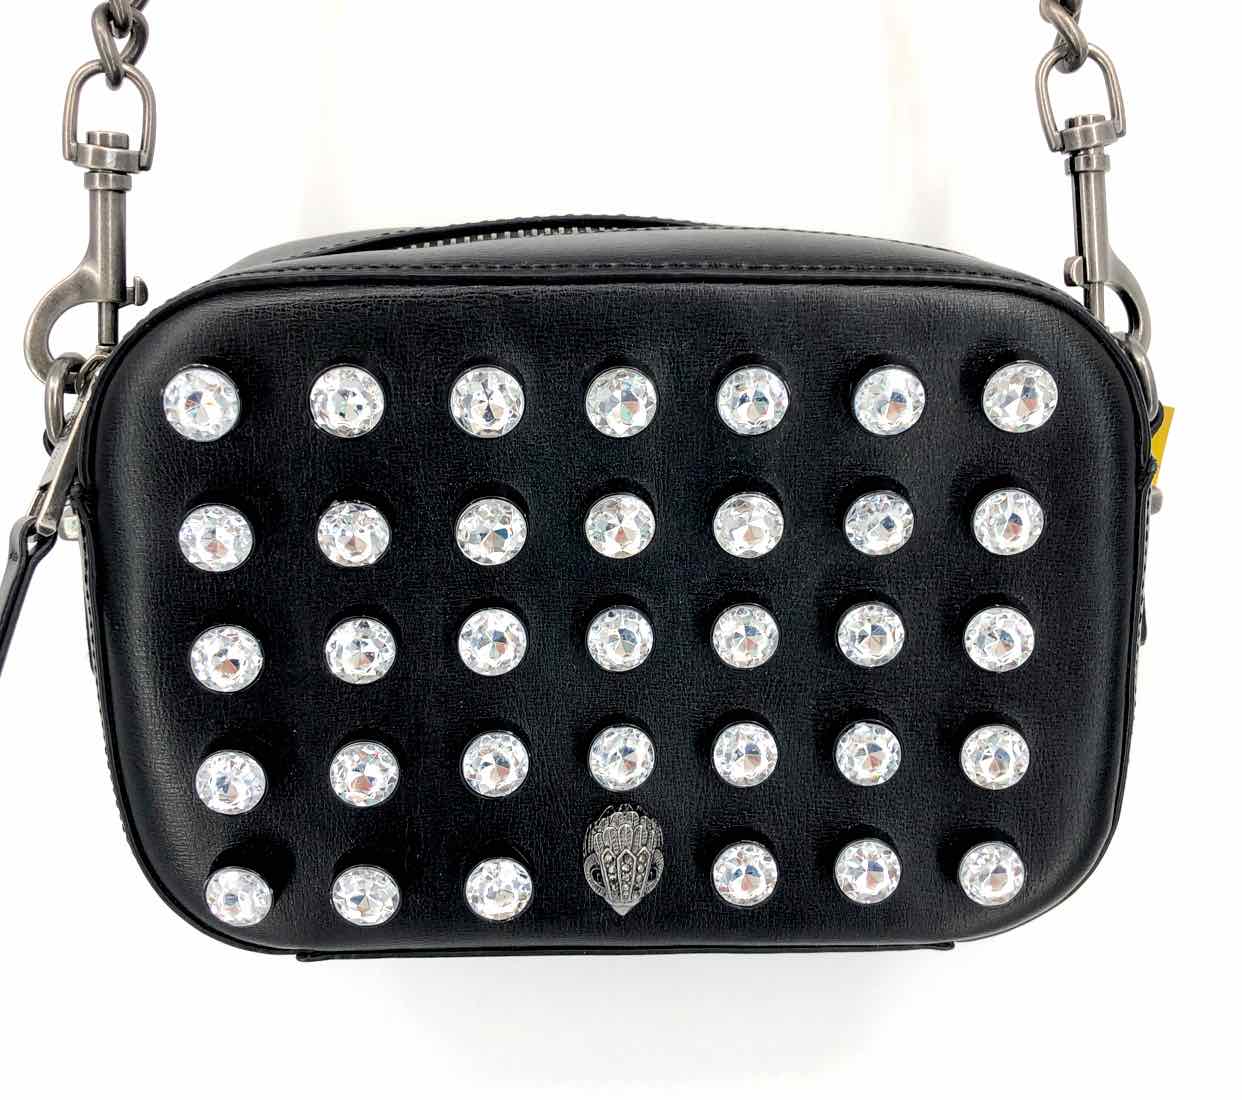 Juicy Couture Black Leather Studded Crossbody Purse Bag Gold Hardware &  Chain | eBay